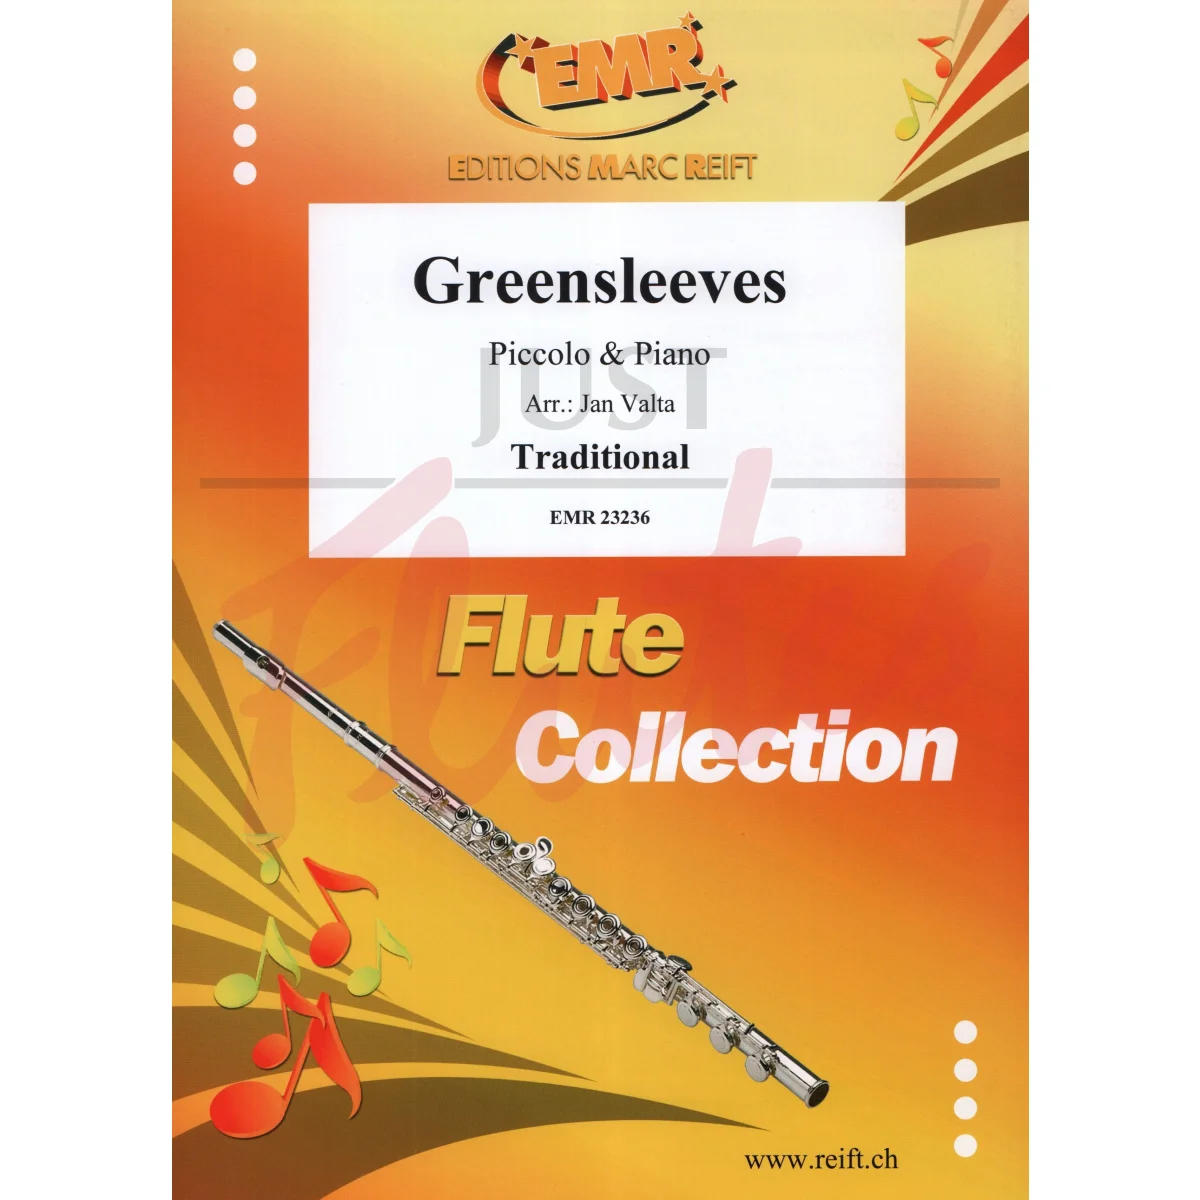 Greensleeves for Piccolo and Piano